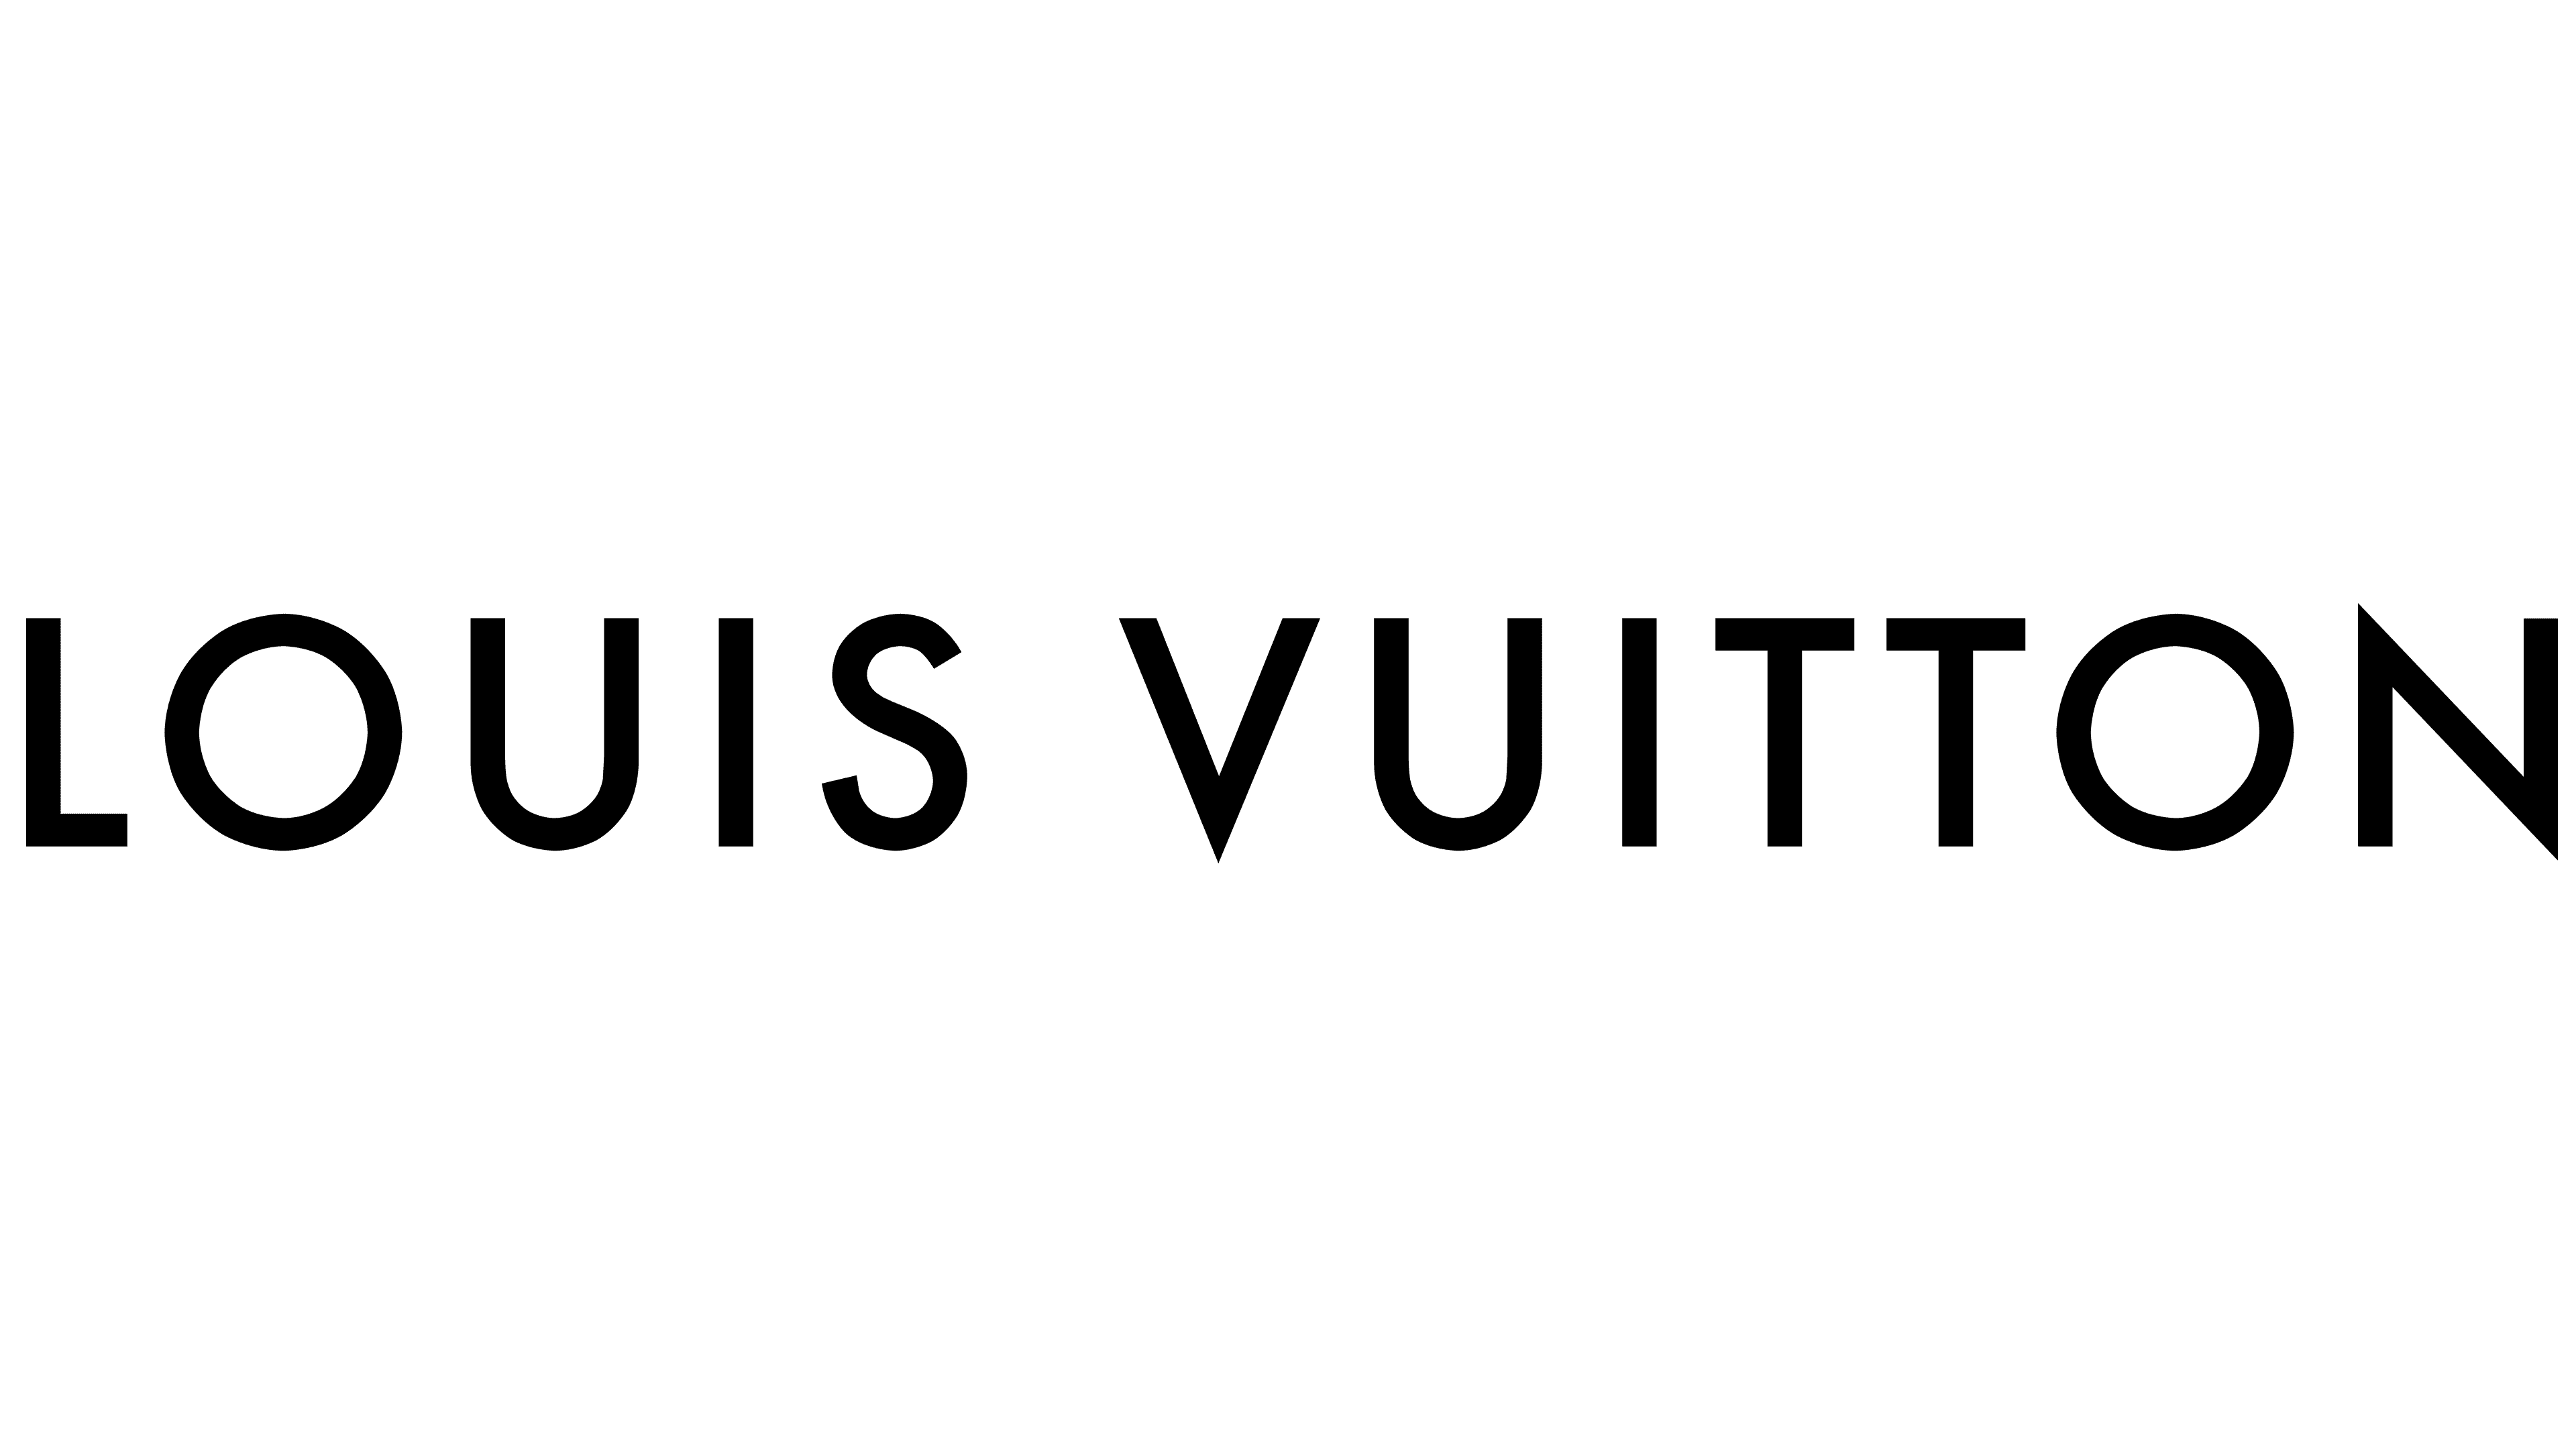 Download Louis Vuitton (LV) Logo in SVG Vector or PNG File Format